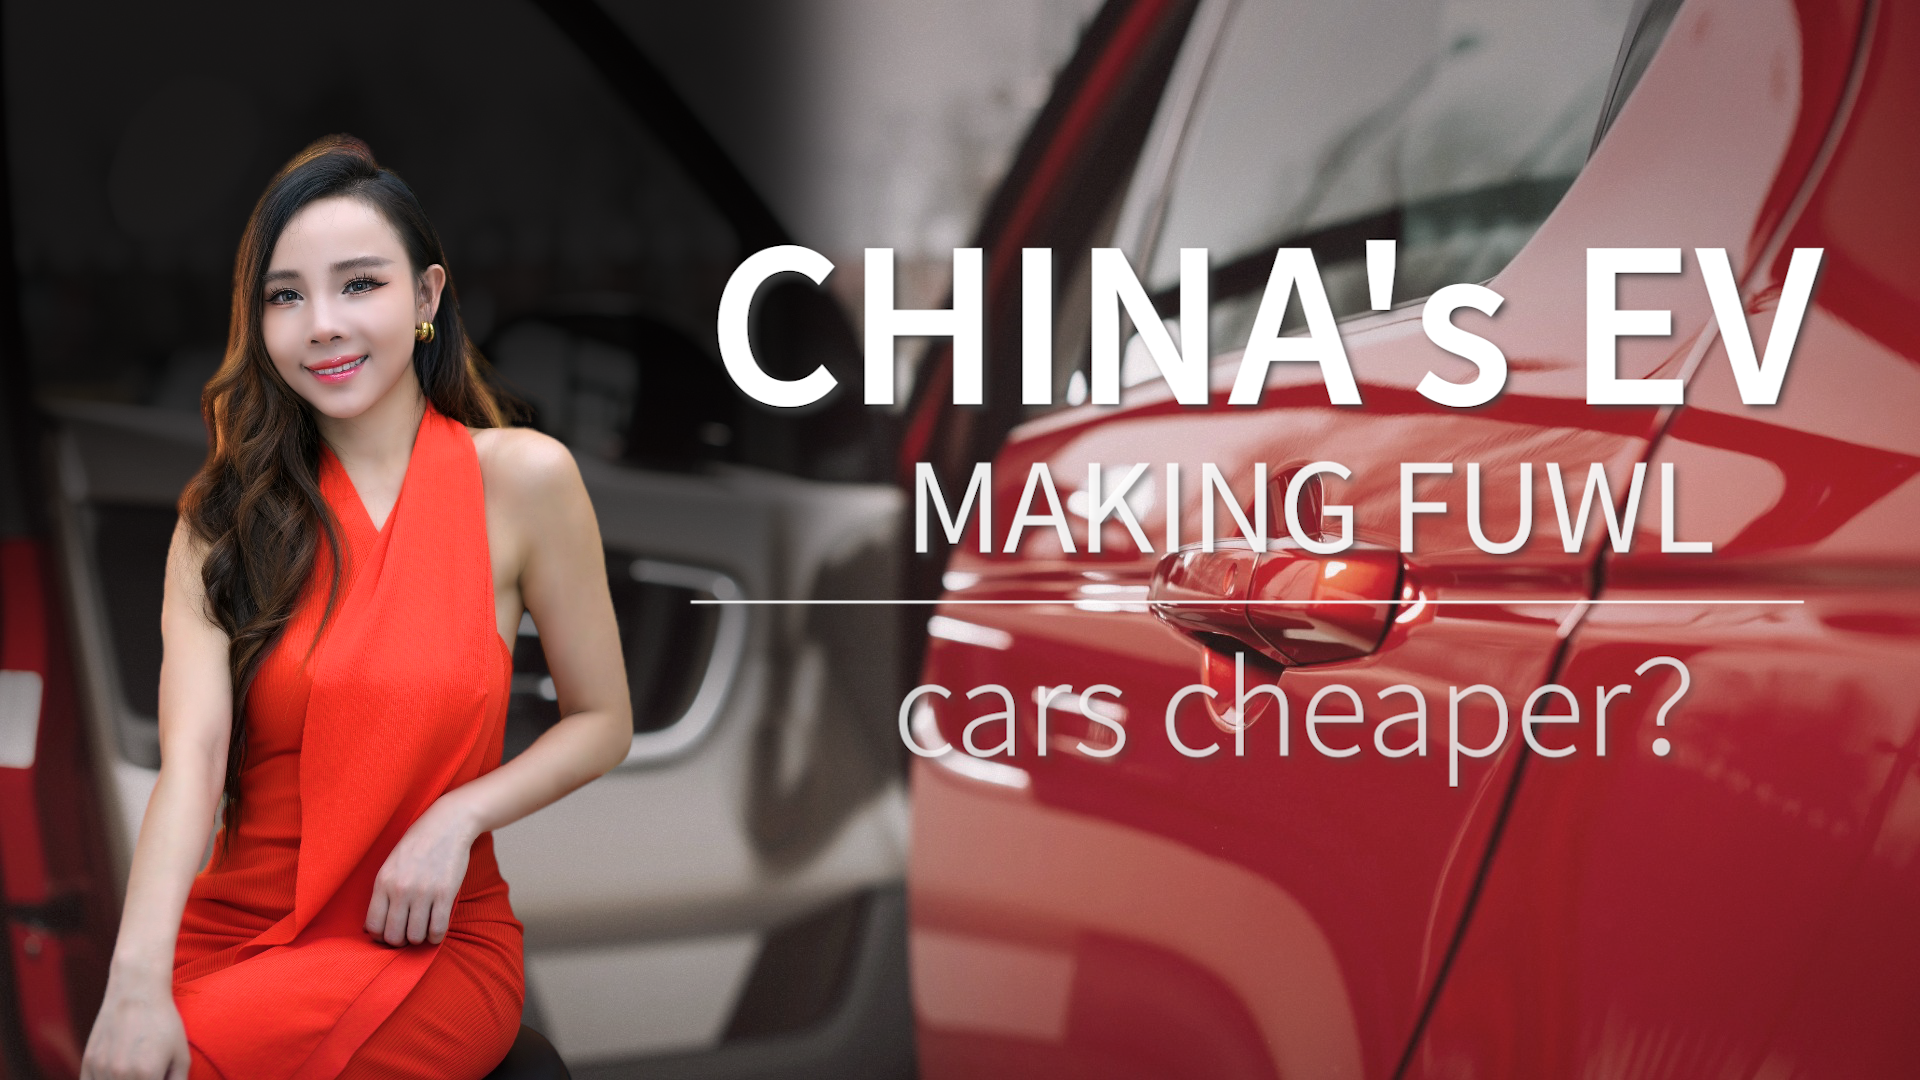 Is China's EV making fuel cars cheaper and cheaper? 